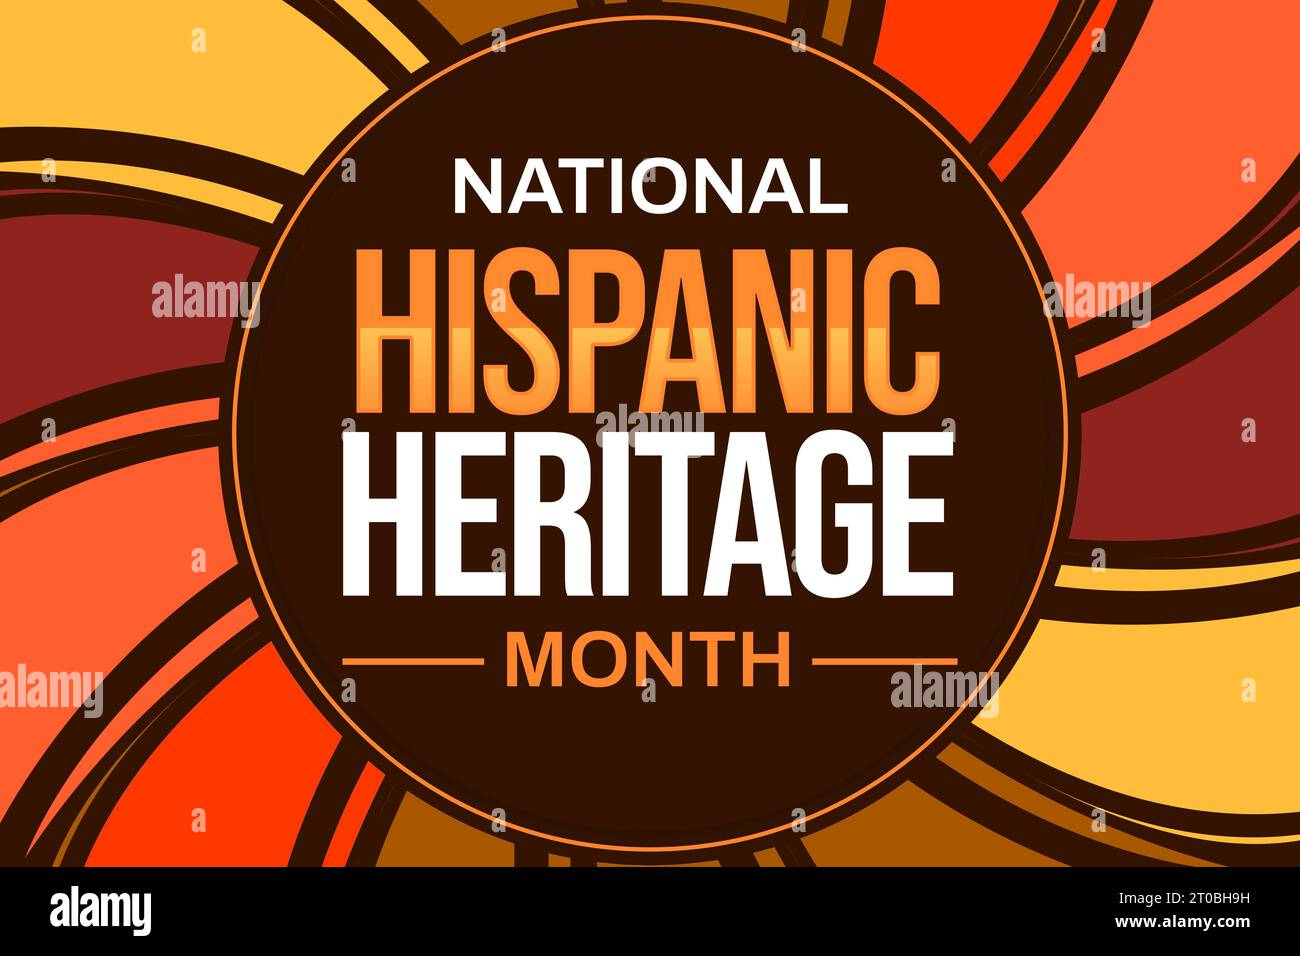 National Hispanic Heritage Month colorful wallpaper design with shapes and typography in the center 2 Stock Photo